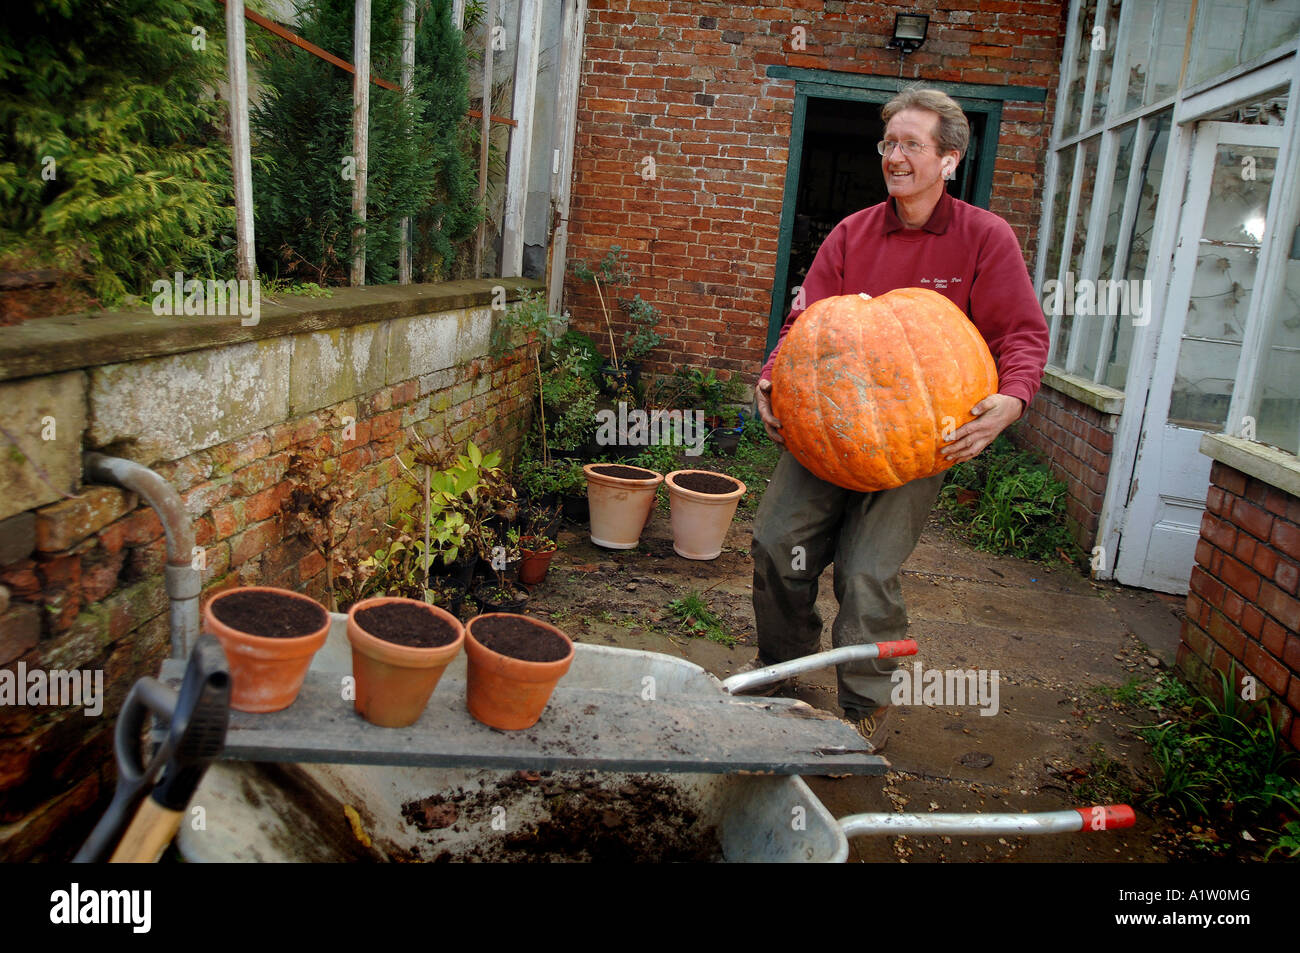 a gardener working in a walled garden in a country house Stock Photo